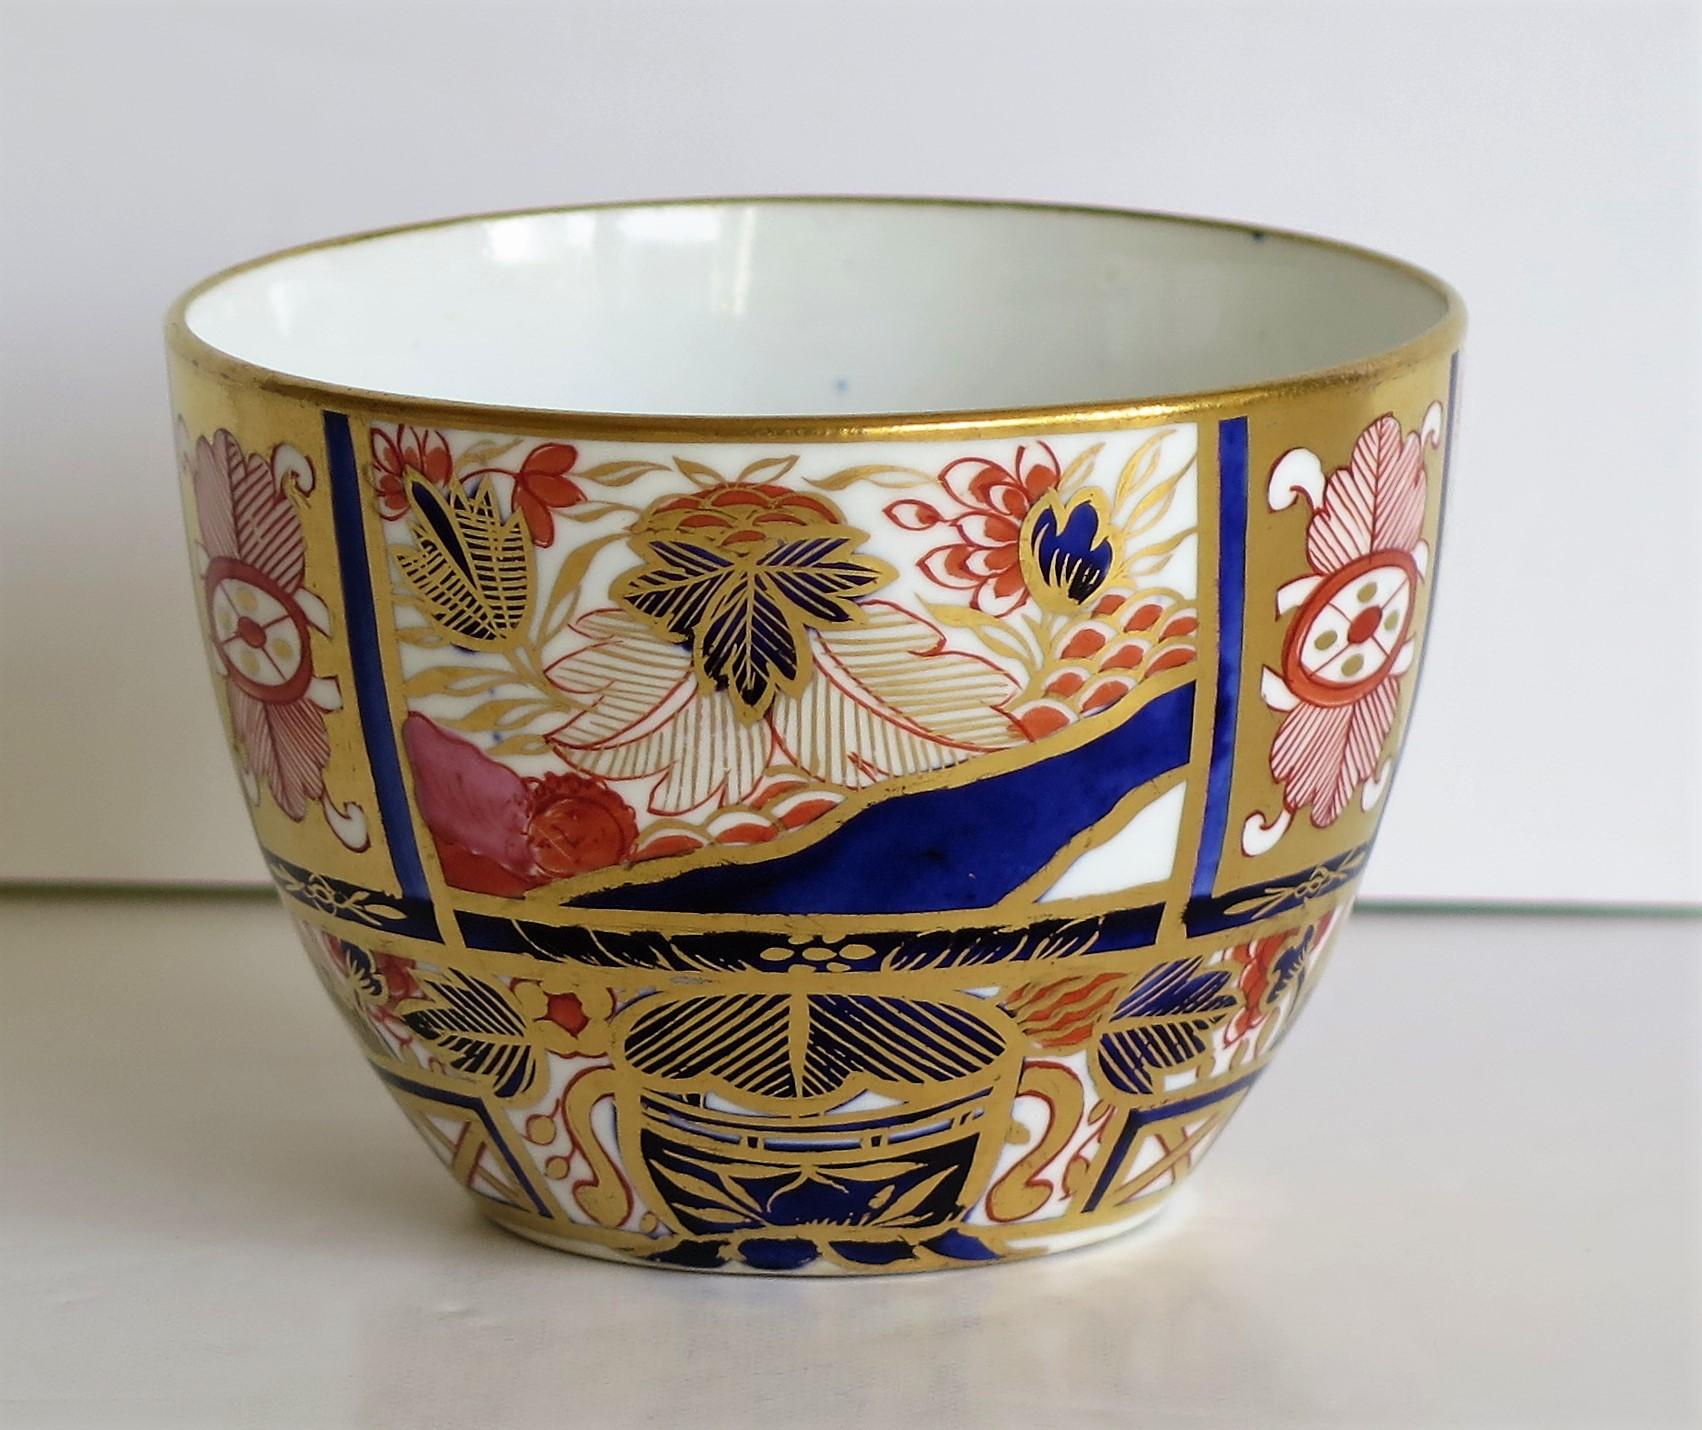 Chinoiserie Early Spode Porcelain Tea Cup Heavily Gilded Pattern 963 Hand Painted